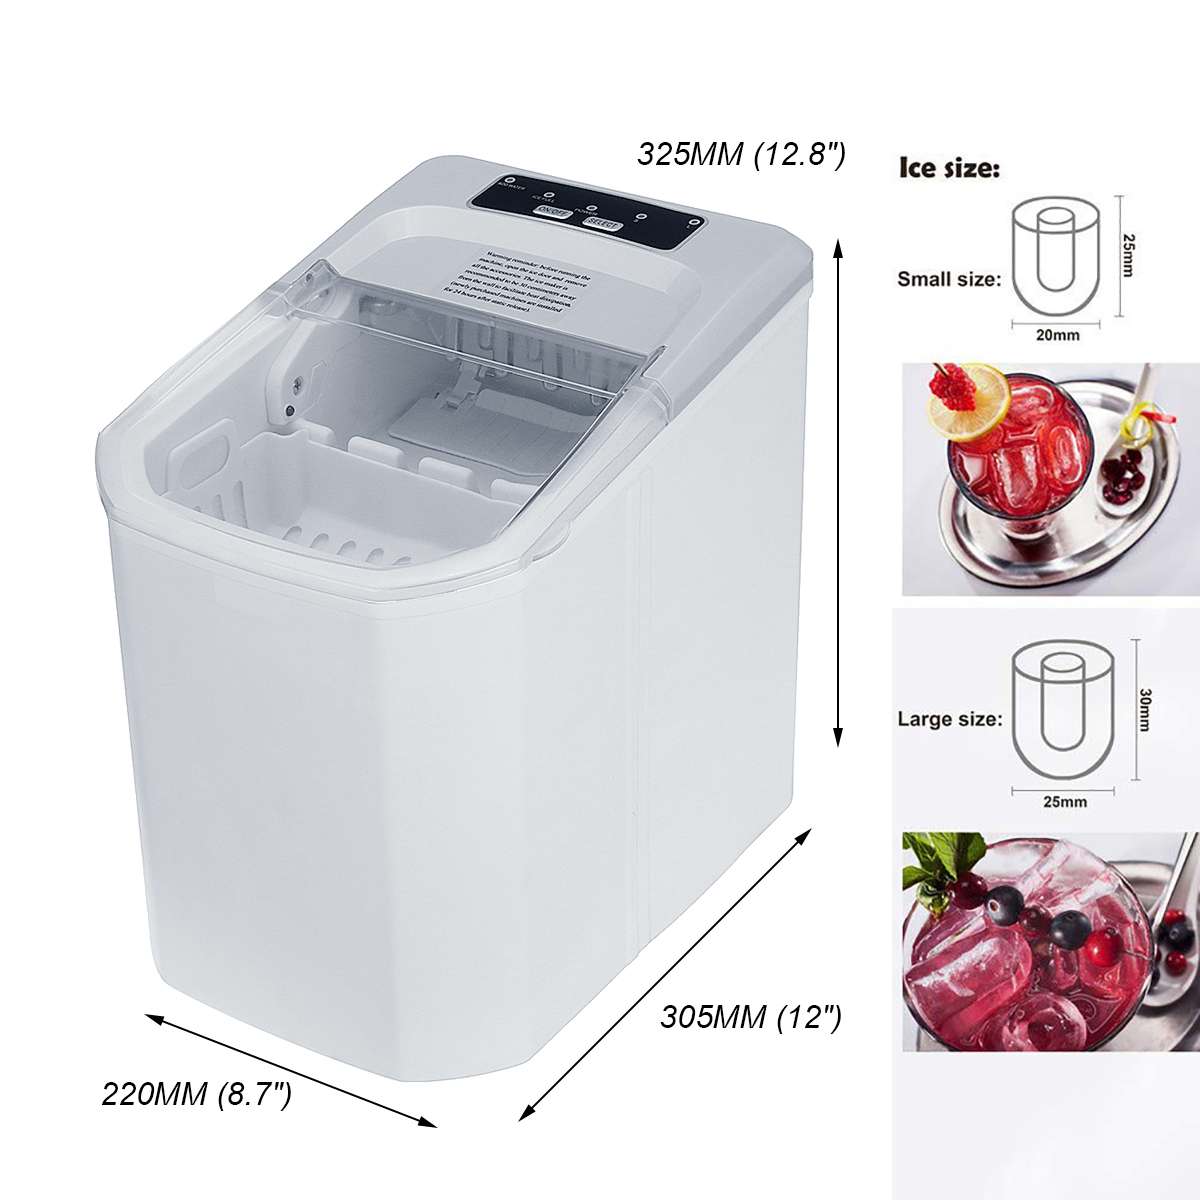 15KG Commercial/Household Ice Maker Milk Tea Shop/Cafe/Cold Drink Shop Ice Cube Machine Stainless Steel Ice Cube Making Machine